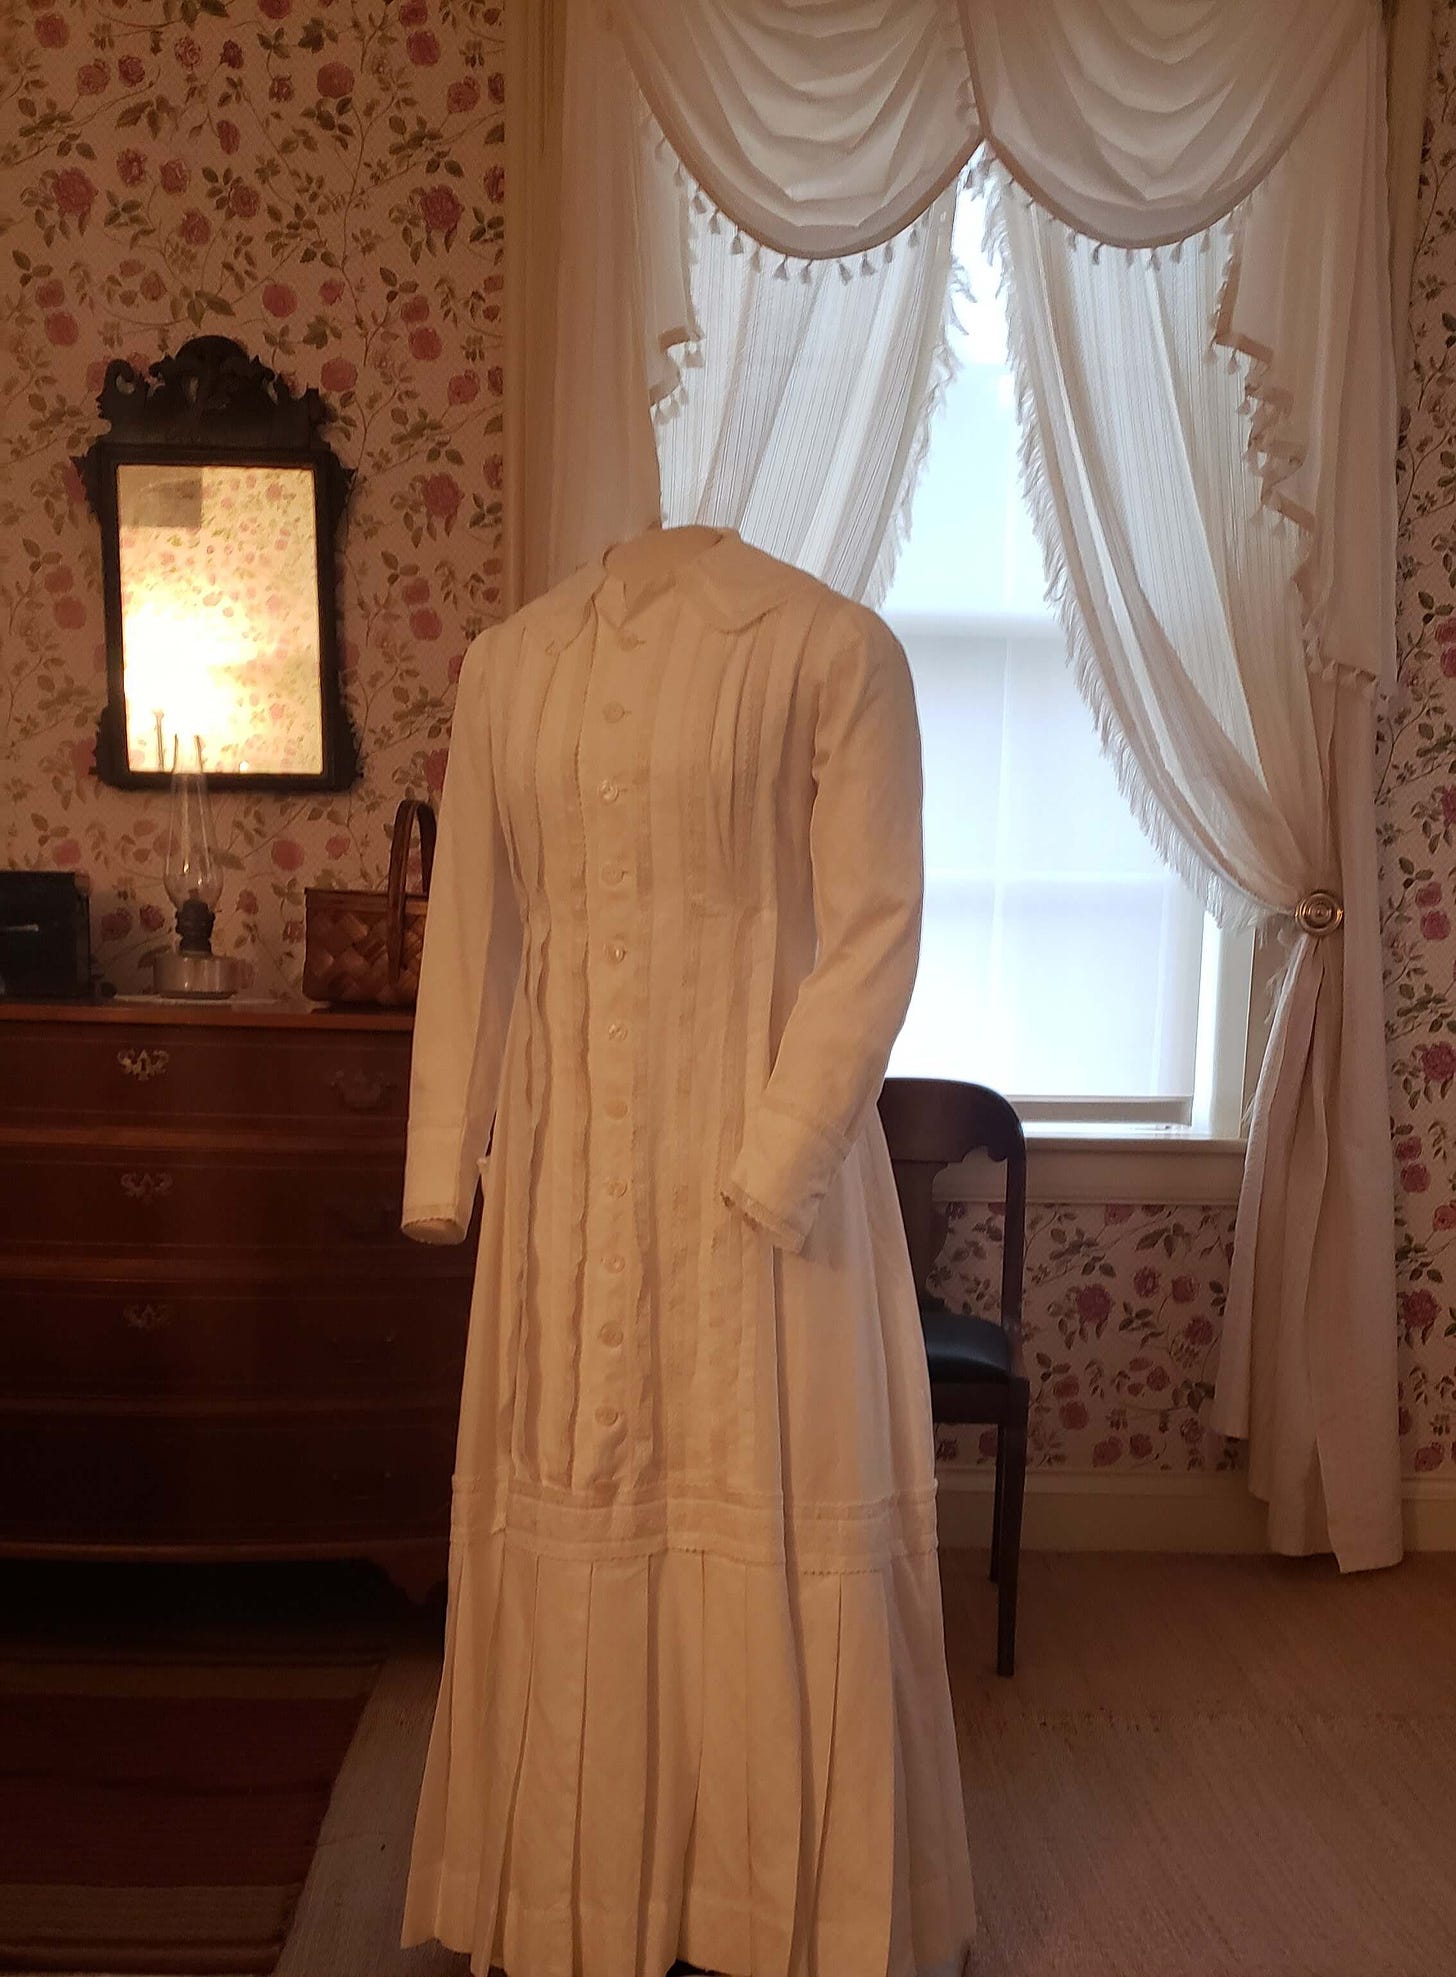 A small form with a replica of Emily Dickinon's white dress. Long-sleeved, with a Peter Pan collar and pleats all the way down to the knees, then a pleated skirt. Buttons all the way down to the skirt. Behind, her dresser and mirror, and a window with beige curtains. The wallpaper is packed with deep pink roses. 